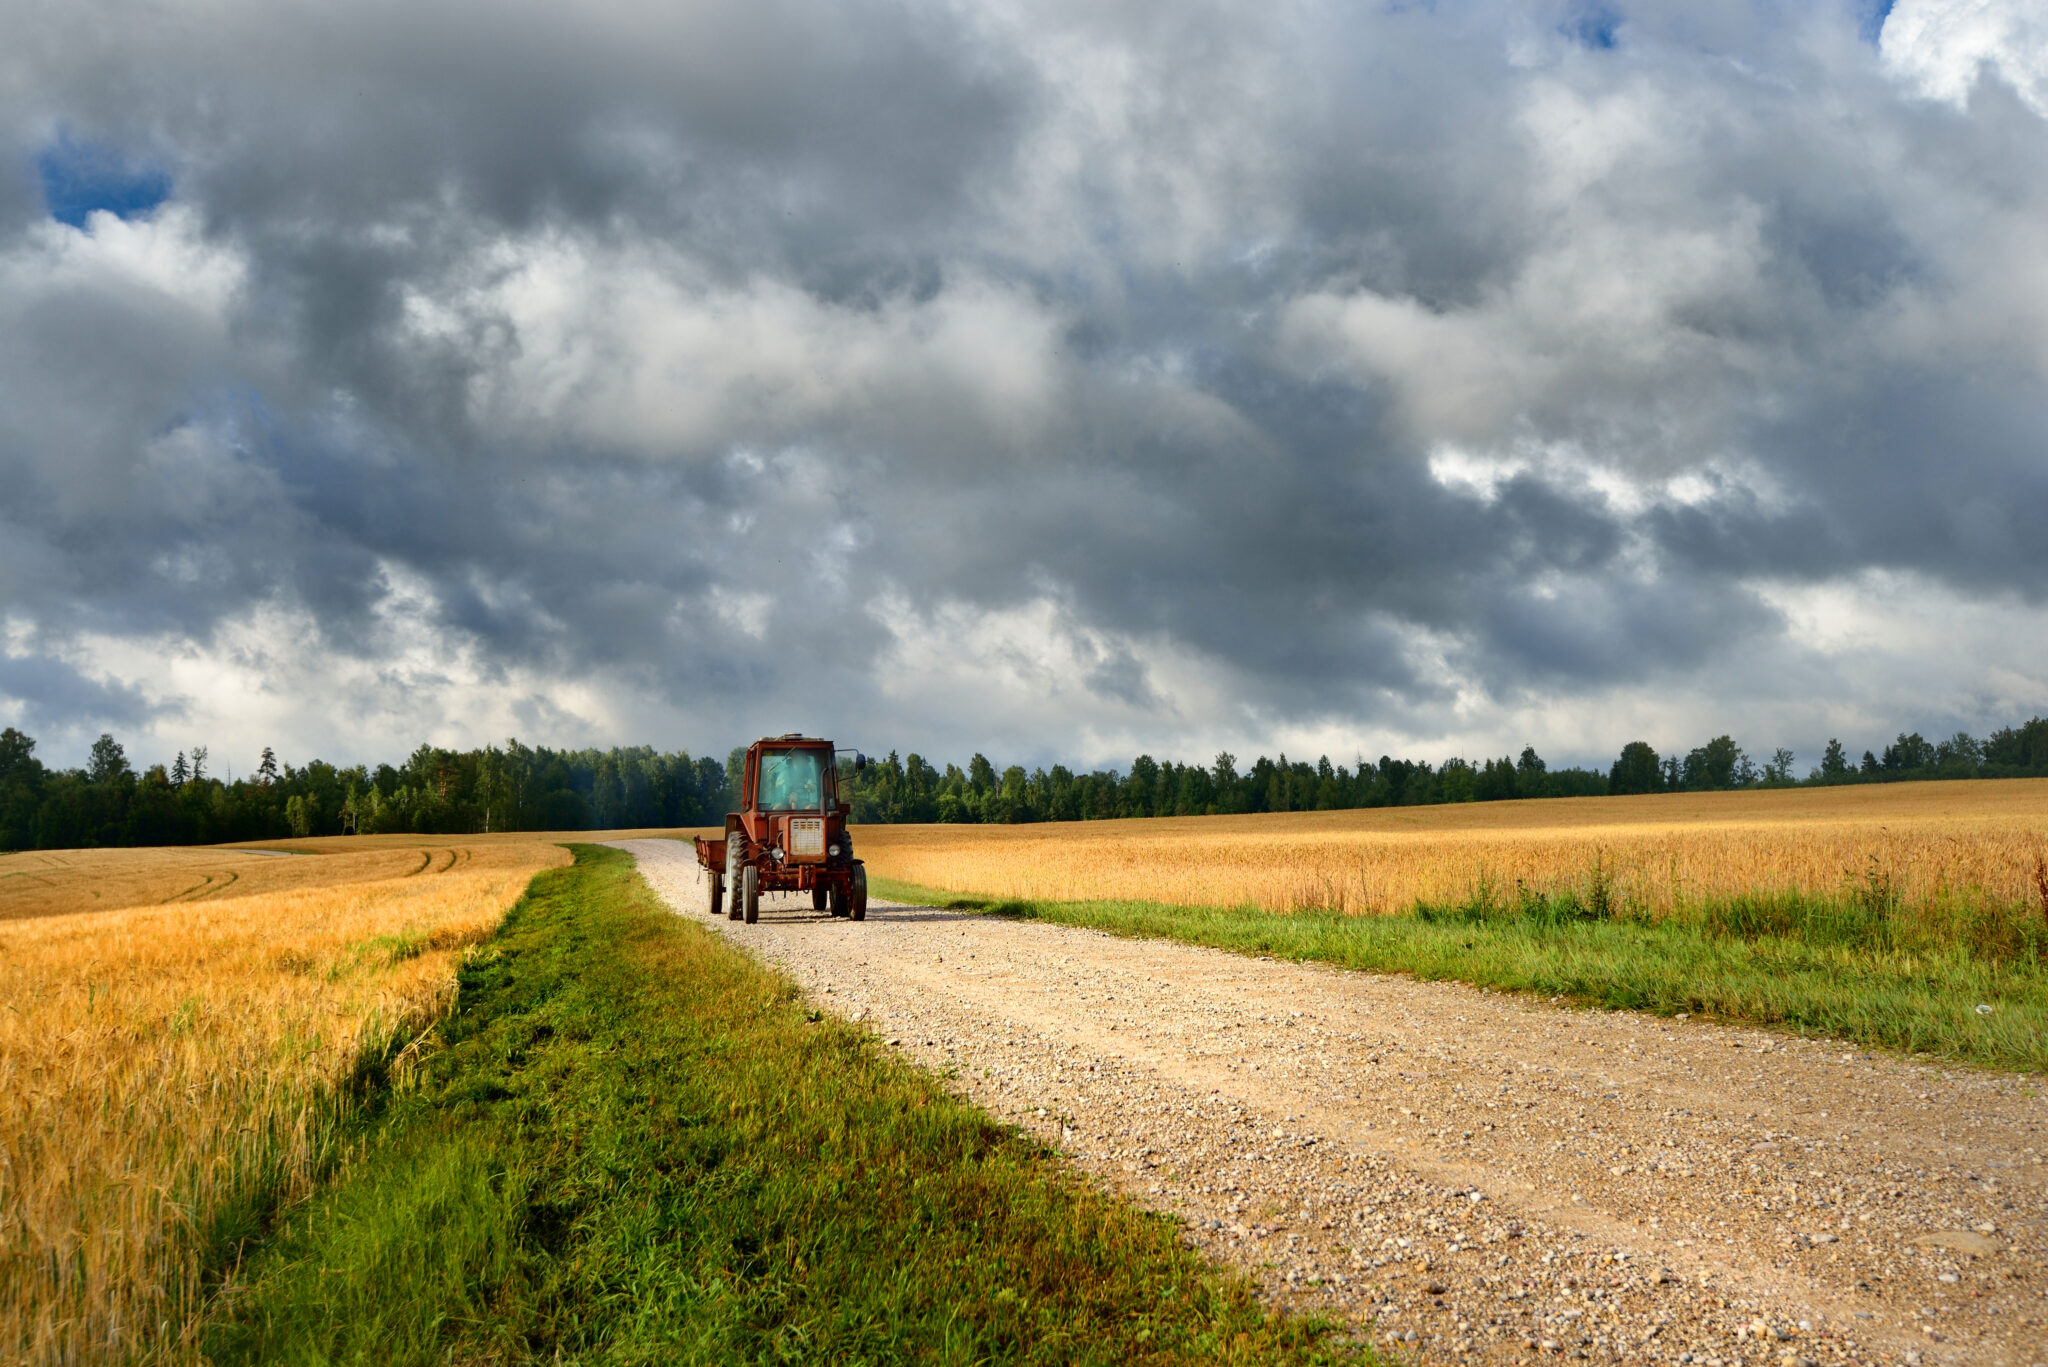 tractor-on-the-road-and-cereal-field-against-dark-stormy-clouds-SBI-300735946-2048x1367.jpg